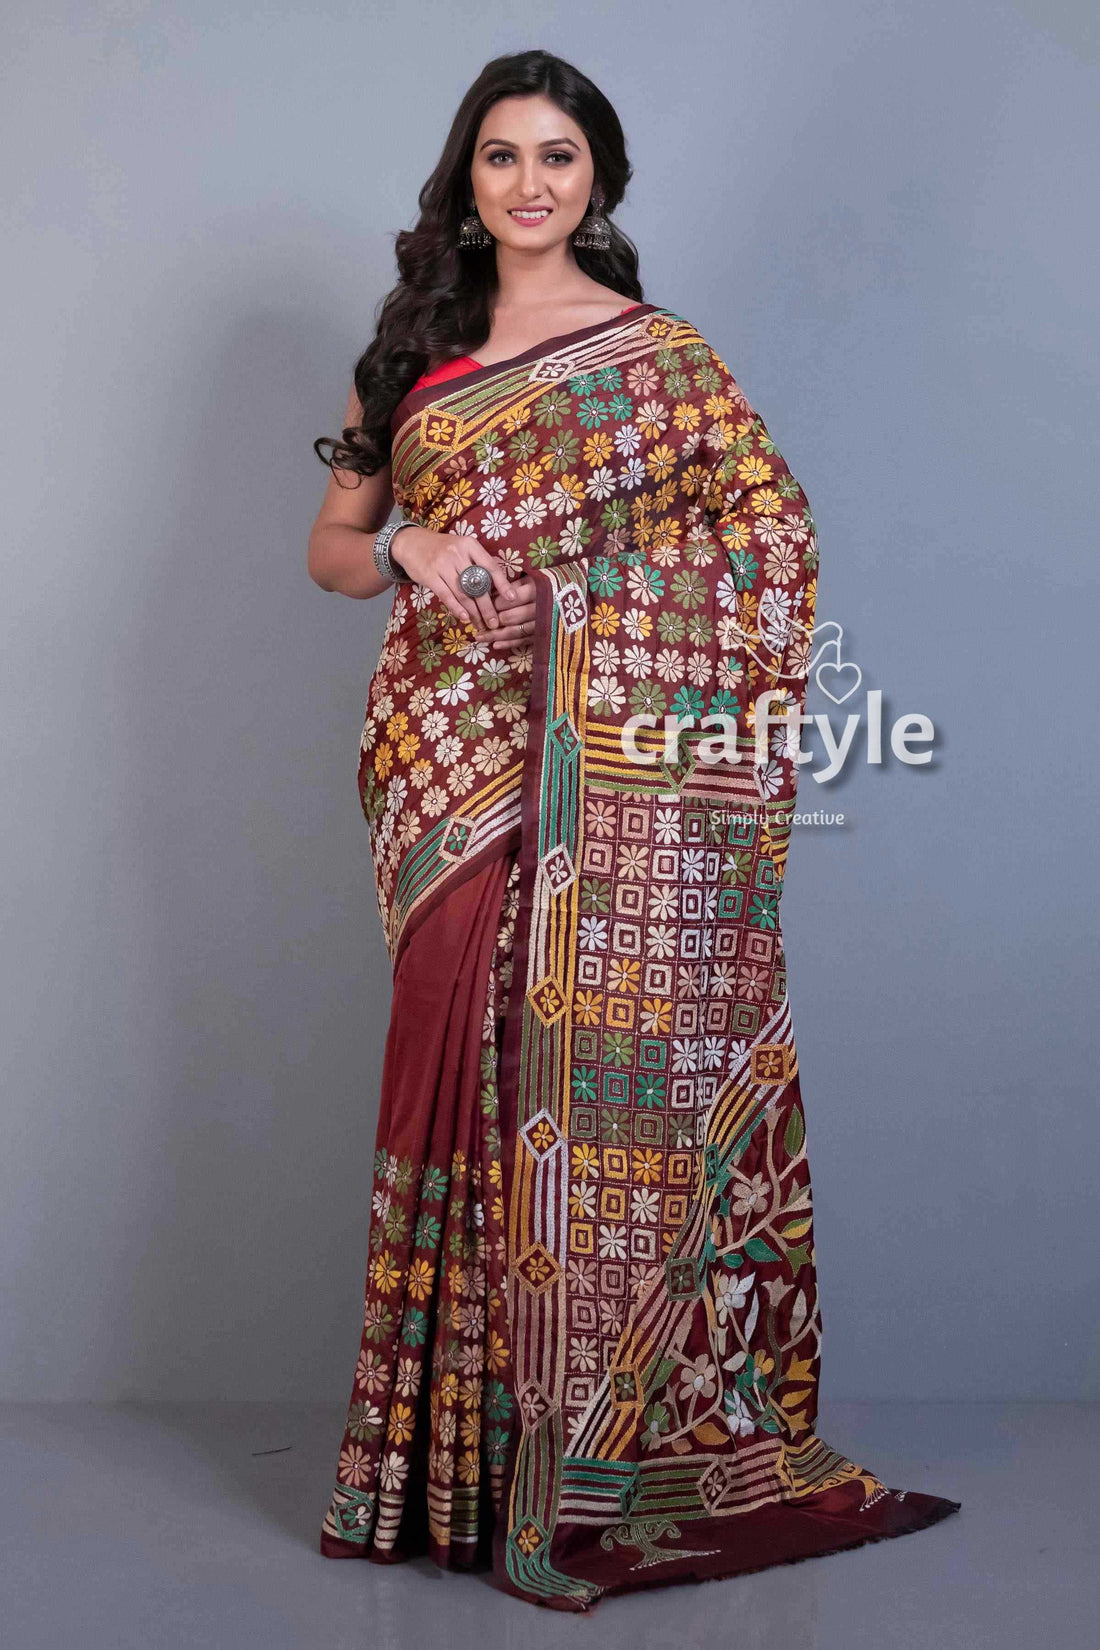 Cinnamon Brown Hand Embroidery Blended Bangalore Kantha Silk Saree-Craftyle